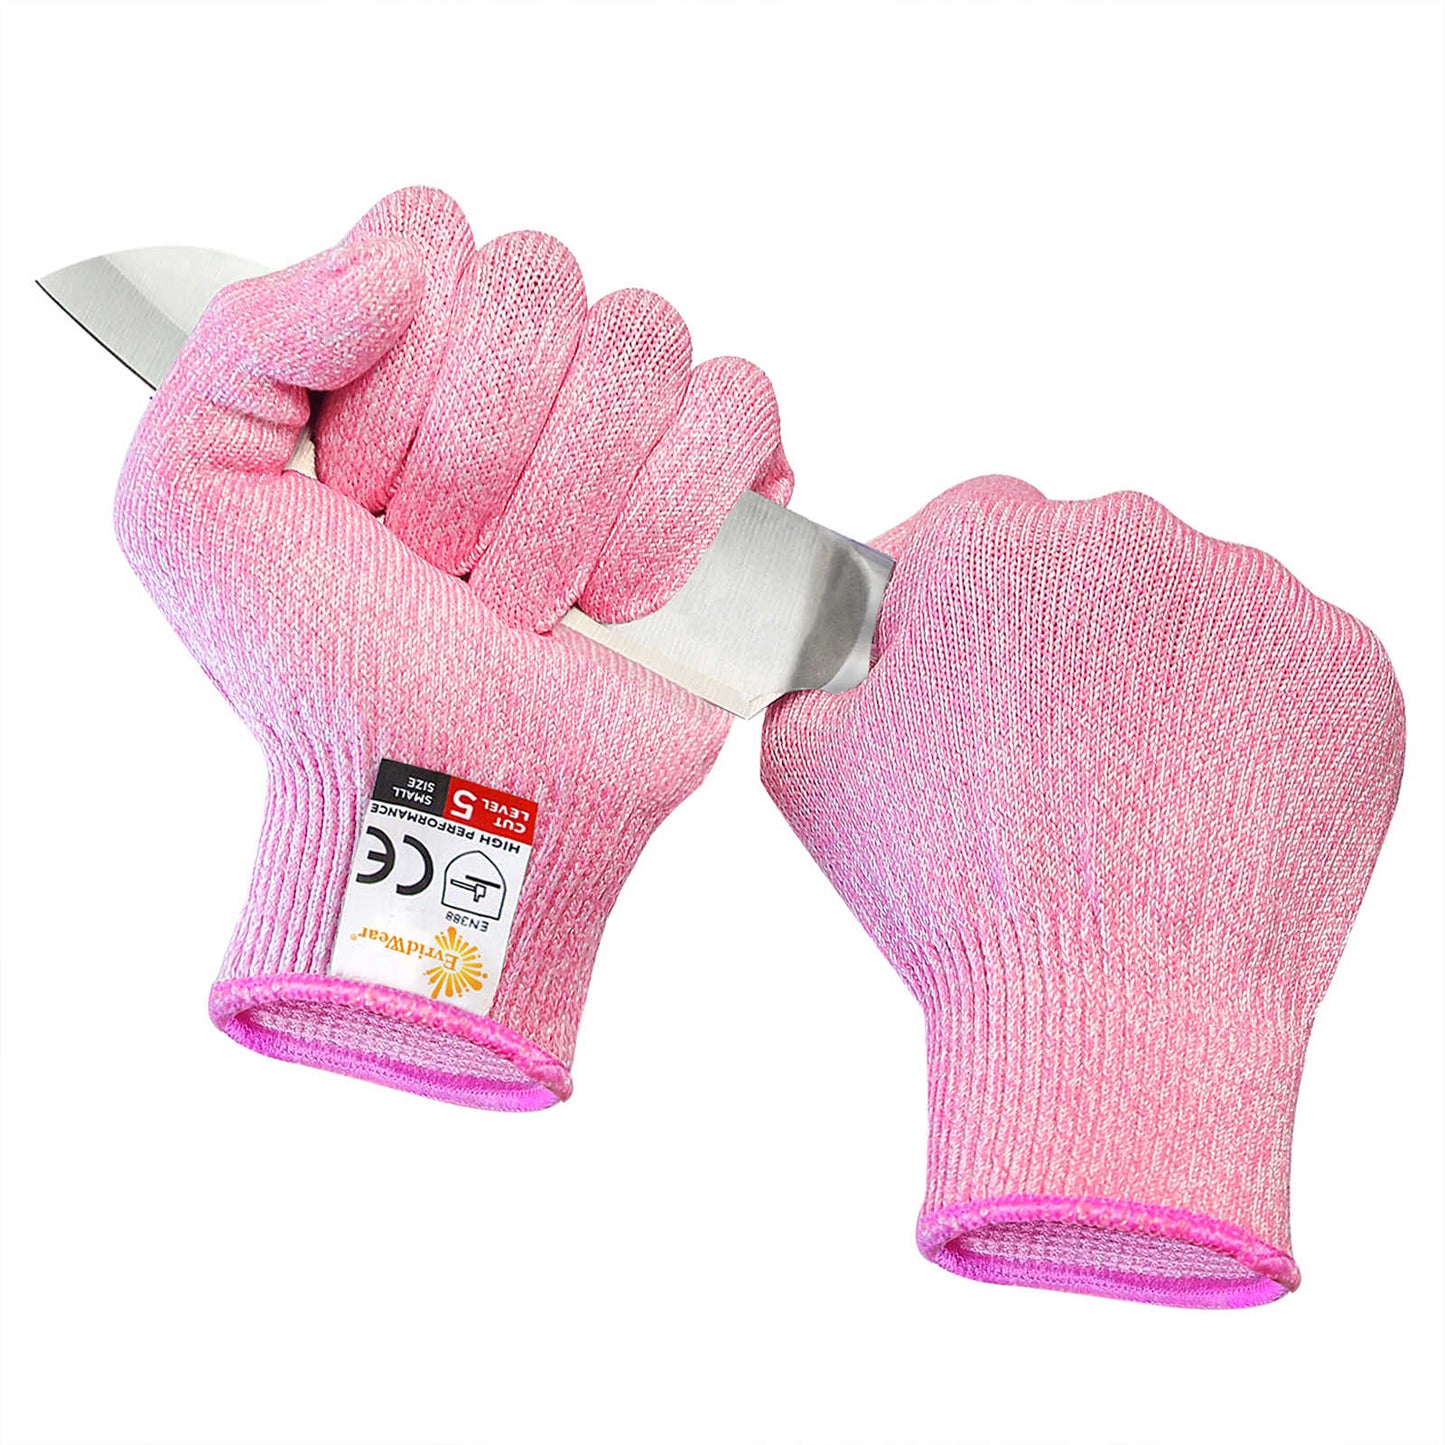 EvridWear 1 Pair Cut Resistant Gloves | Food Grade | Level 5 Protection | HPPE (Pink)